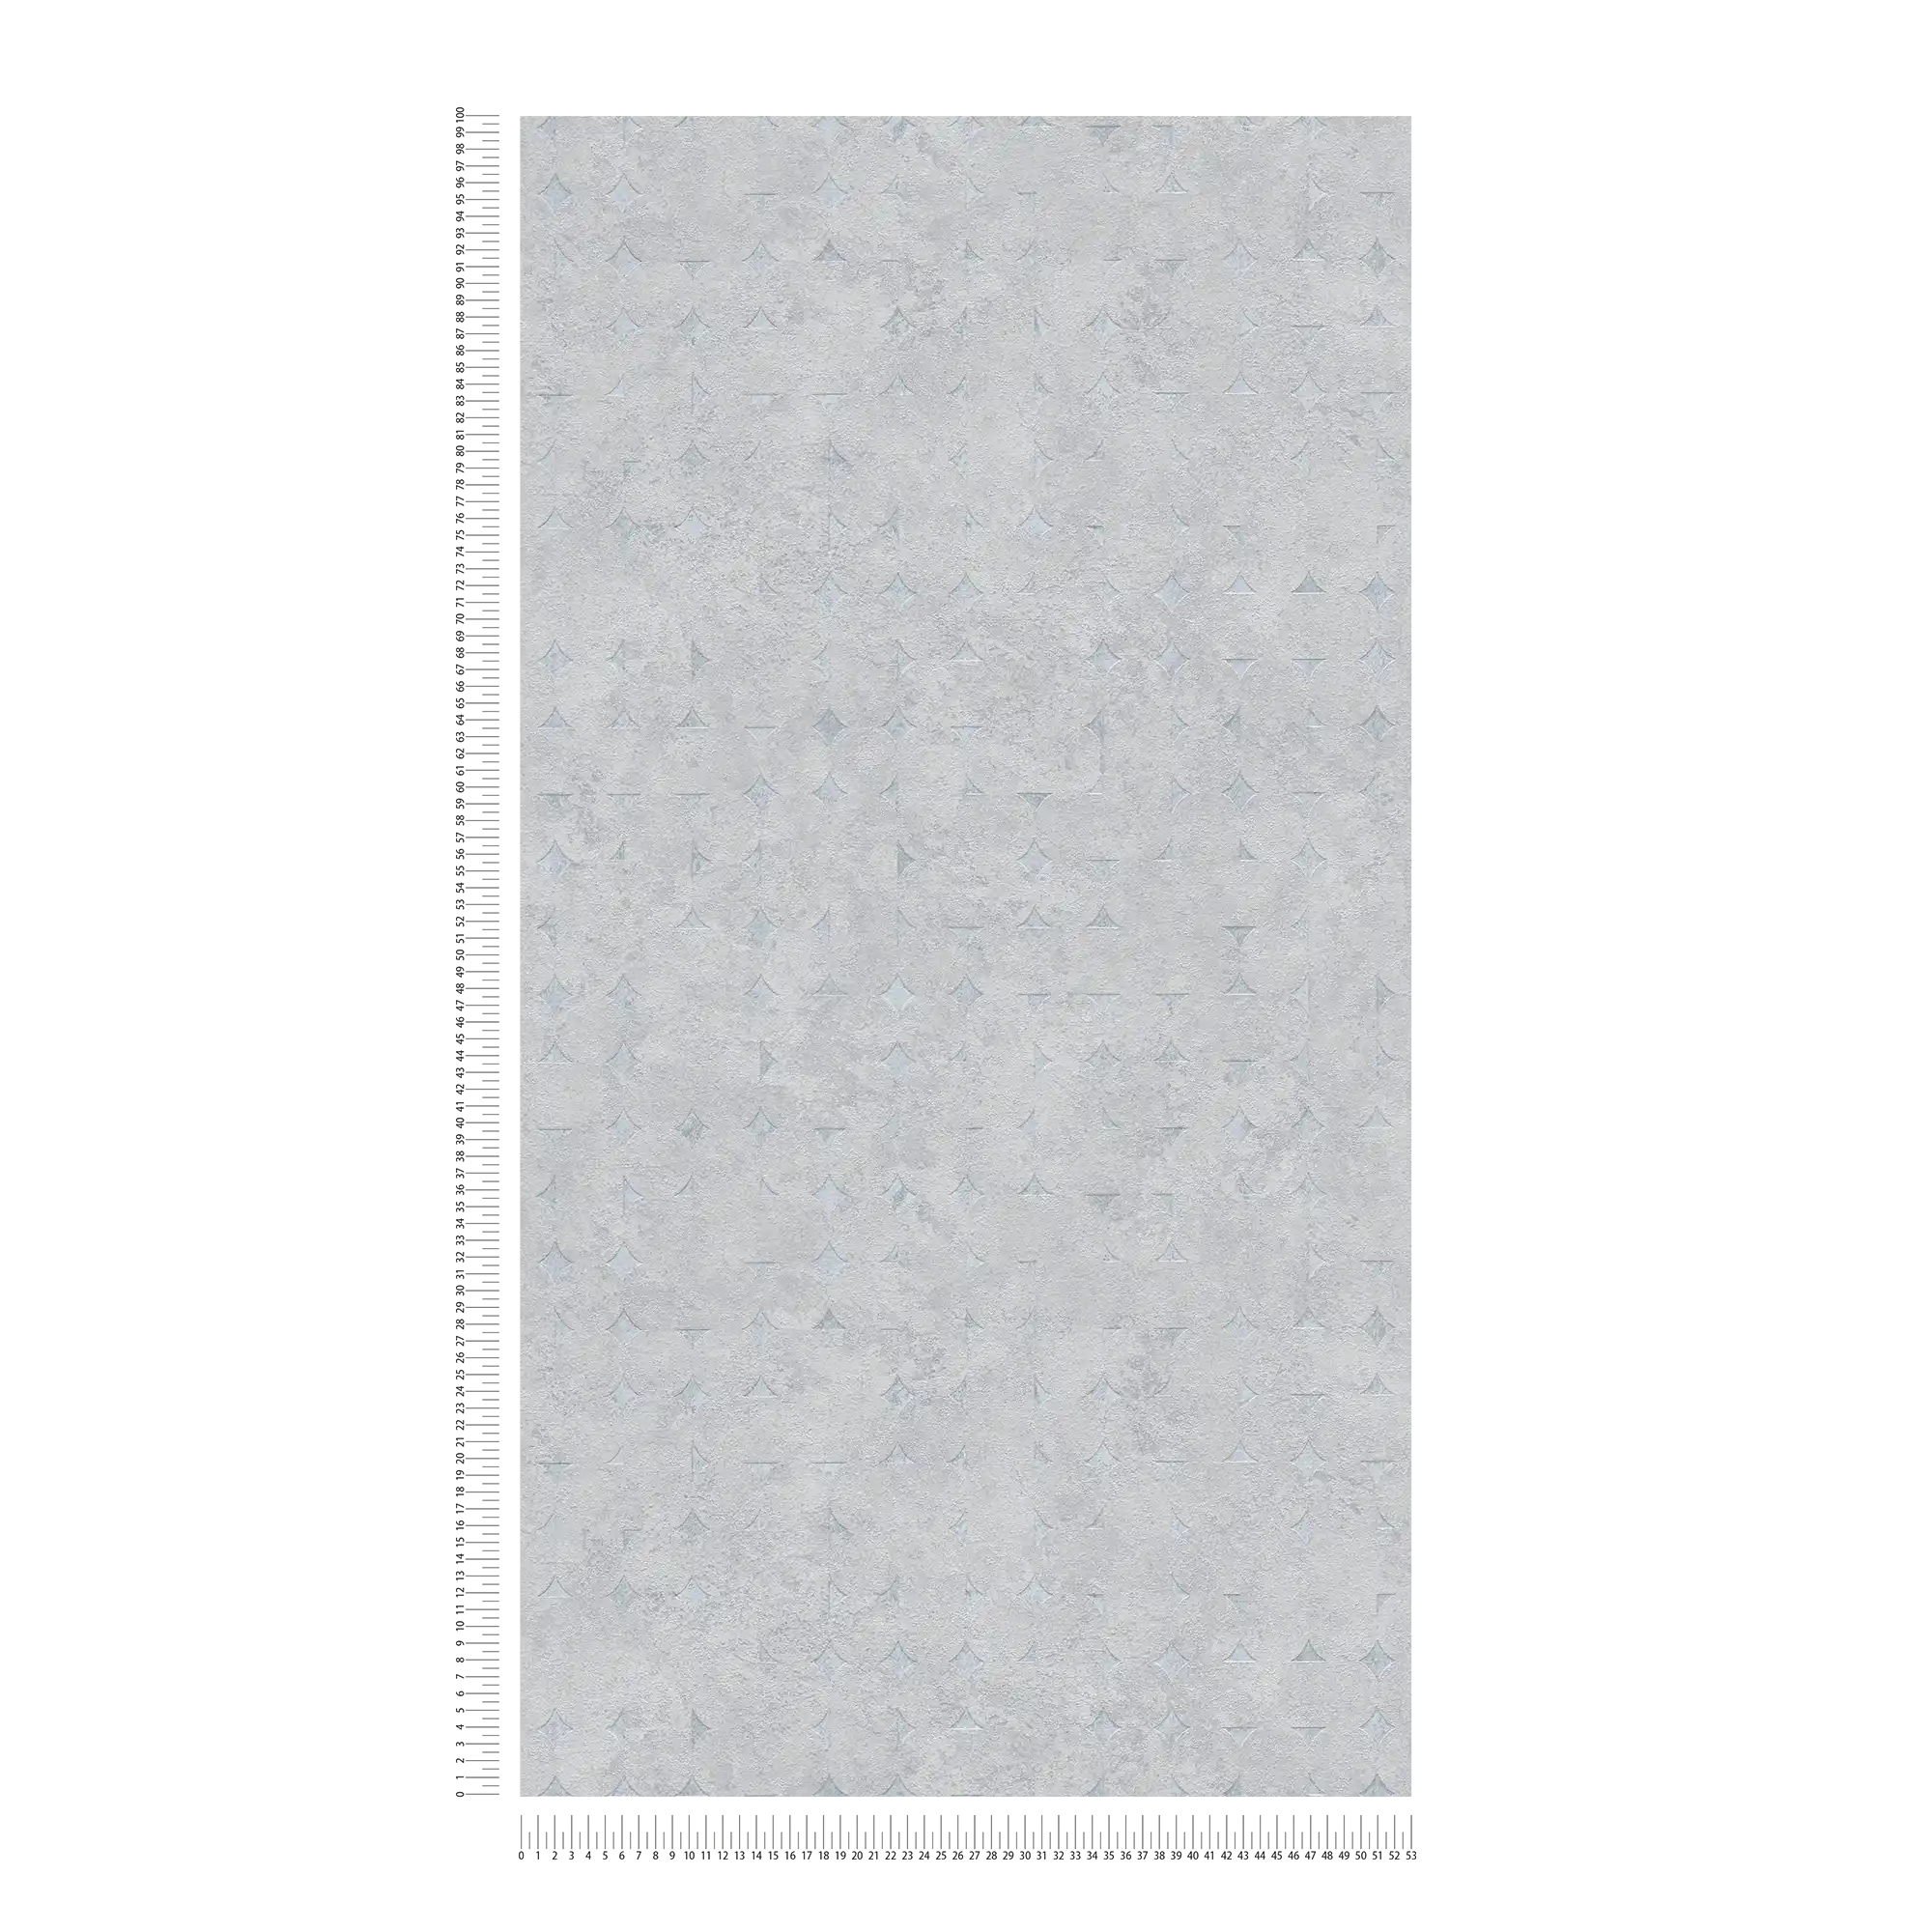             Non-woven wallpaper with geometric shapes and shiny accents - light grey, silver
        